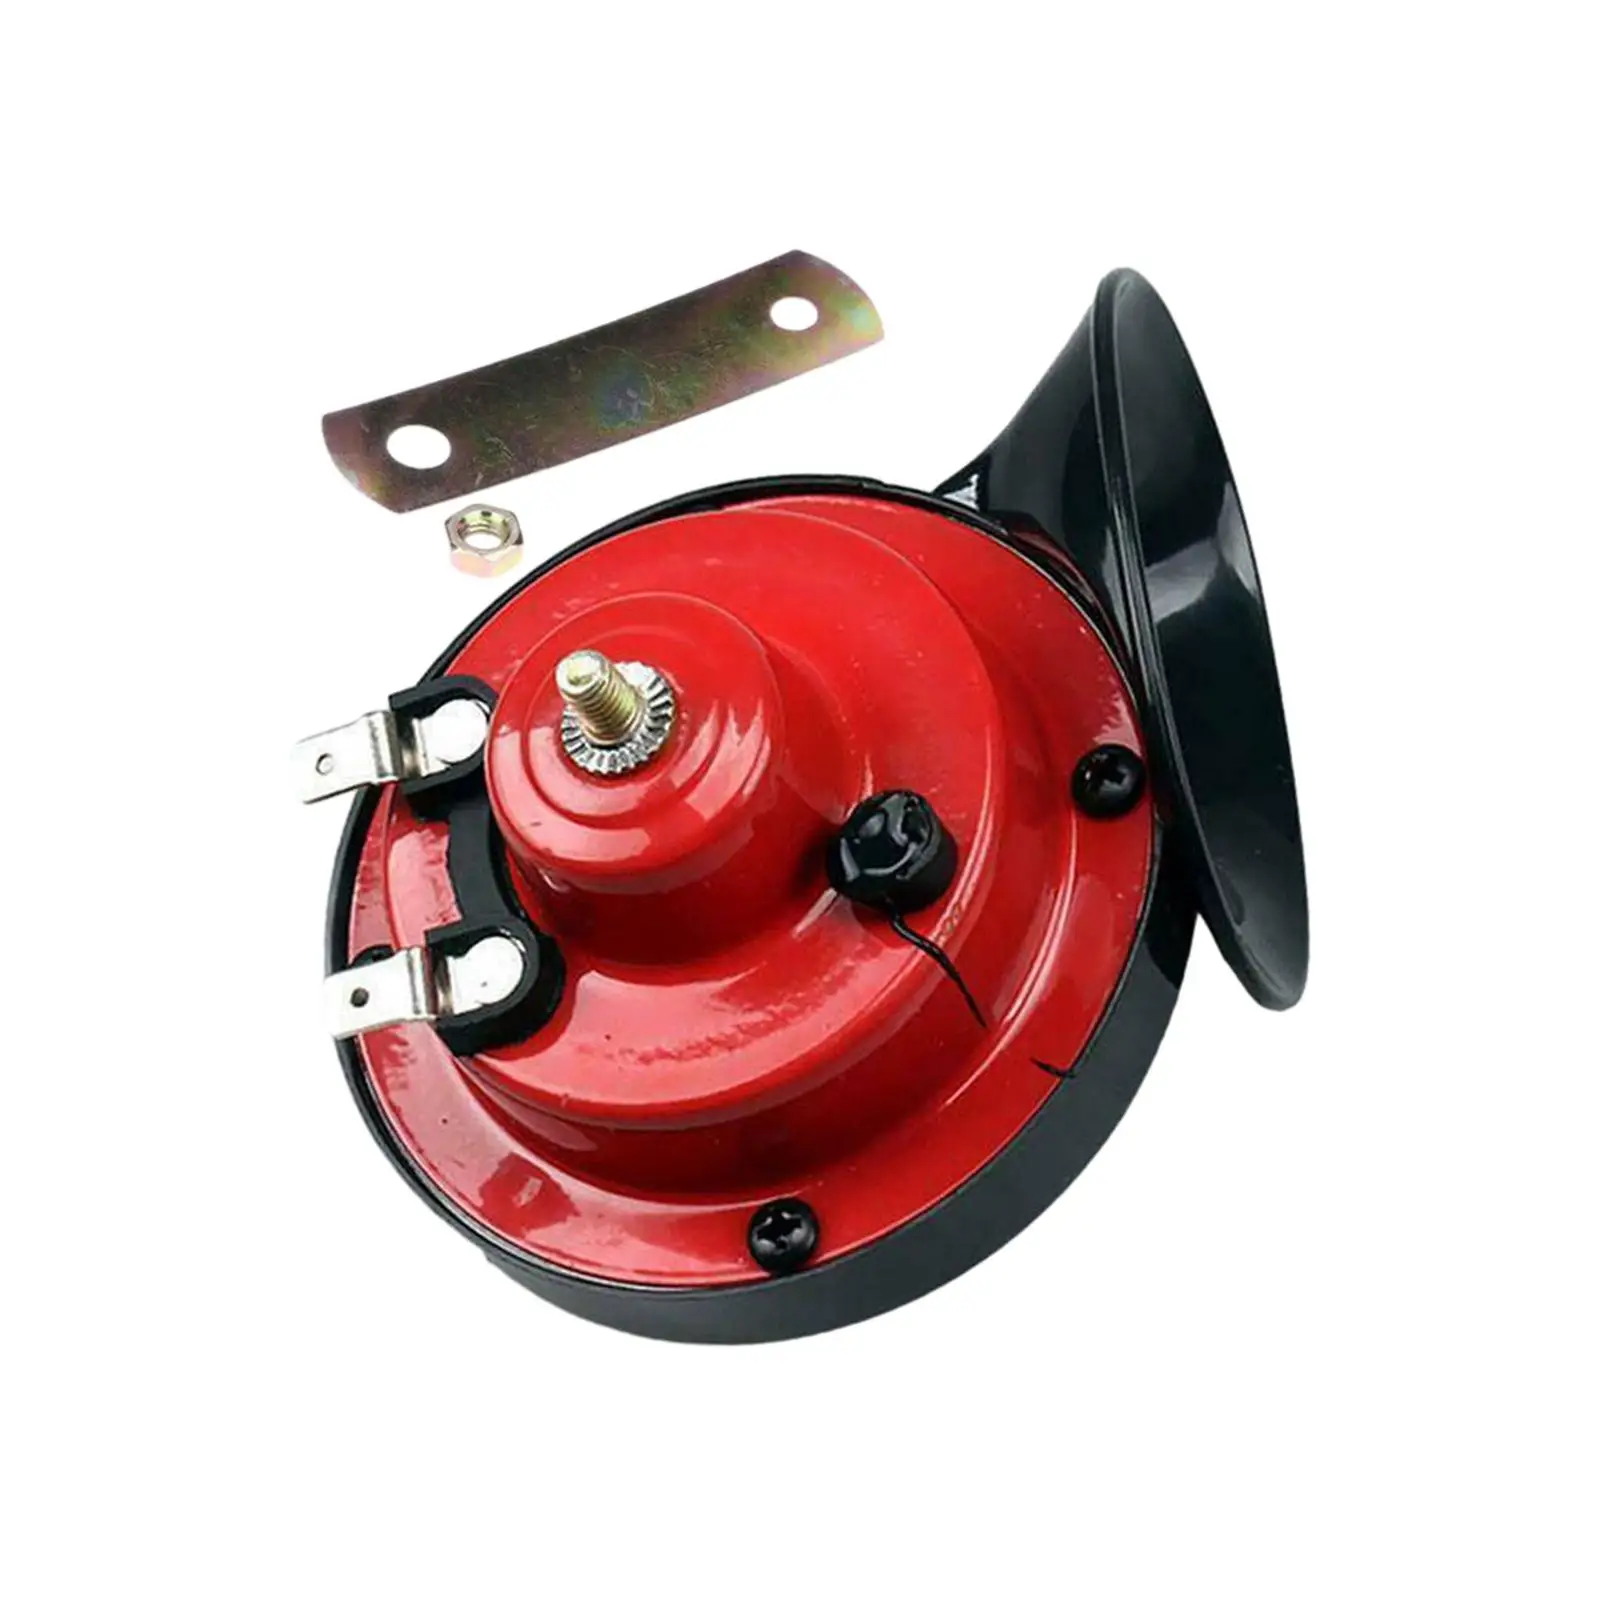 Electric Snails for Cars Train Speaker for Cars for Cars Vehicles Boats